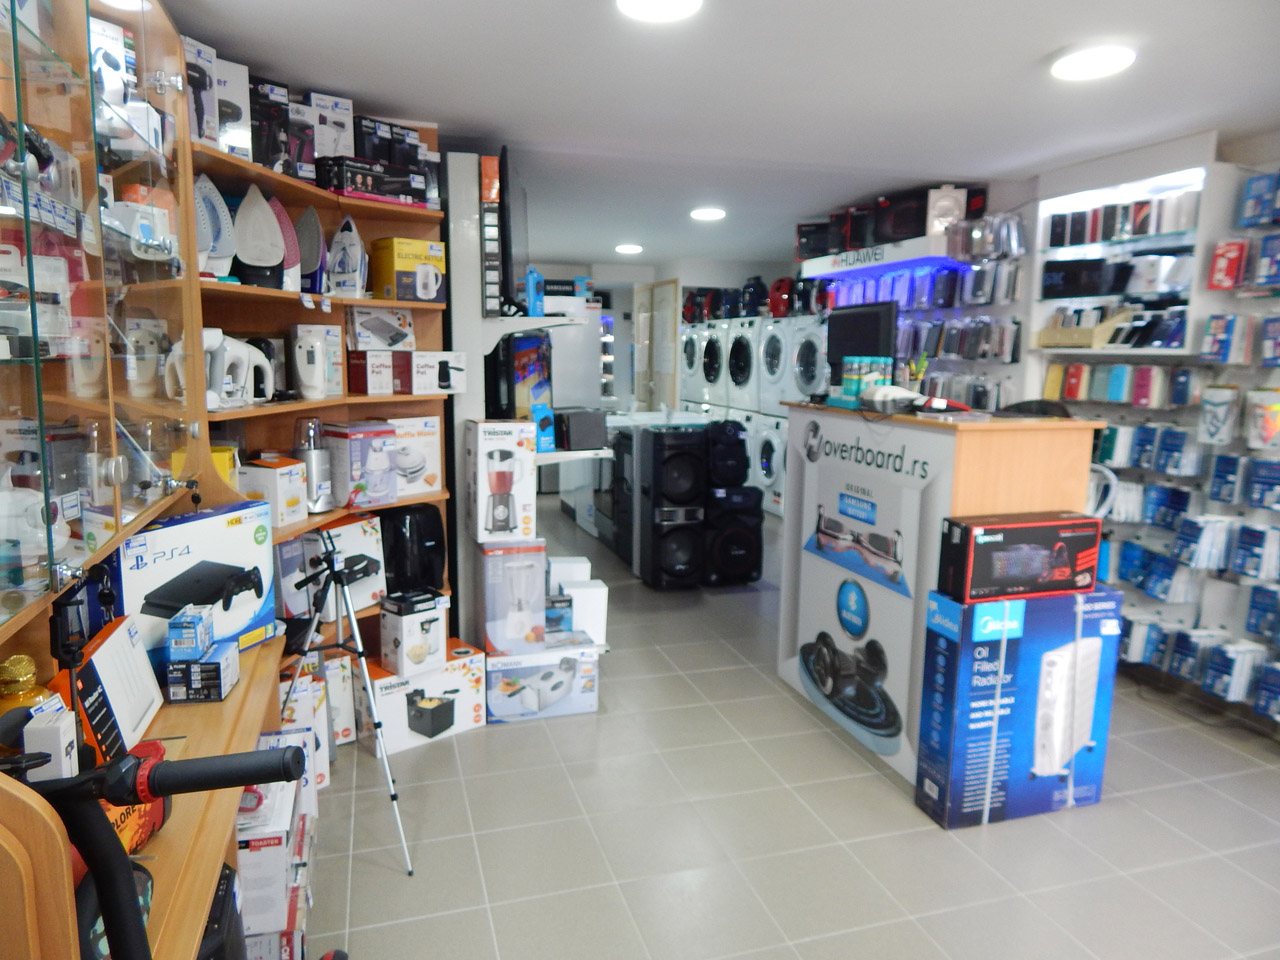 CT MOBILE Sales and service of mobile phone Gornji Milanovac - Photo 1